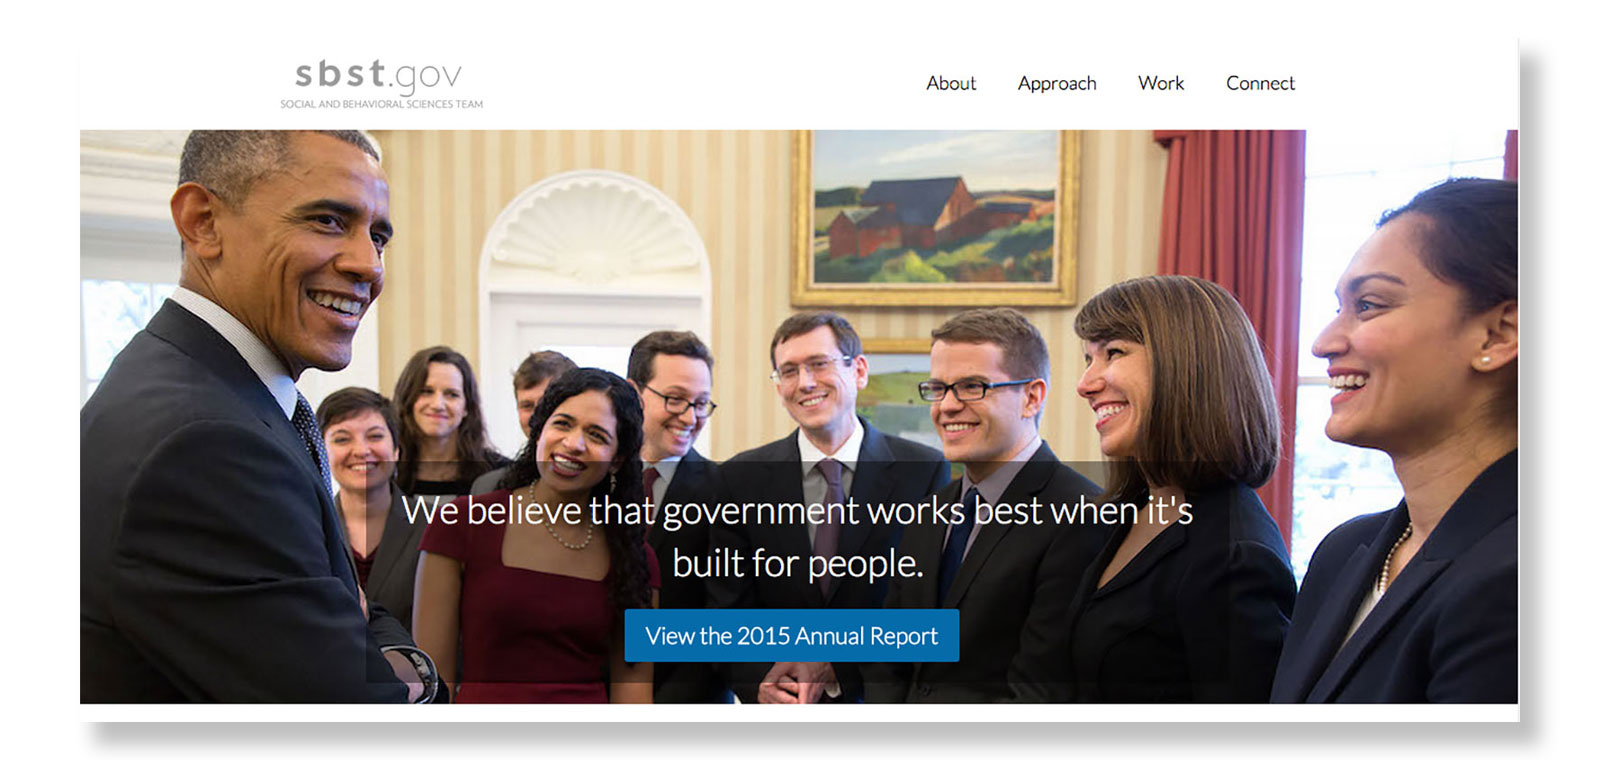 The Social and Behavior Sciences homepage